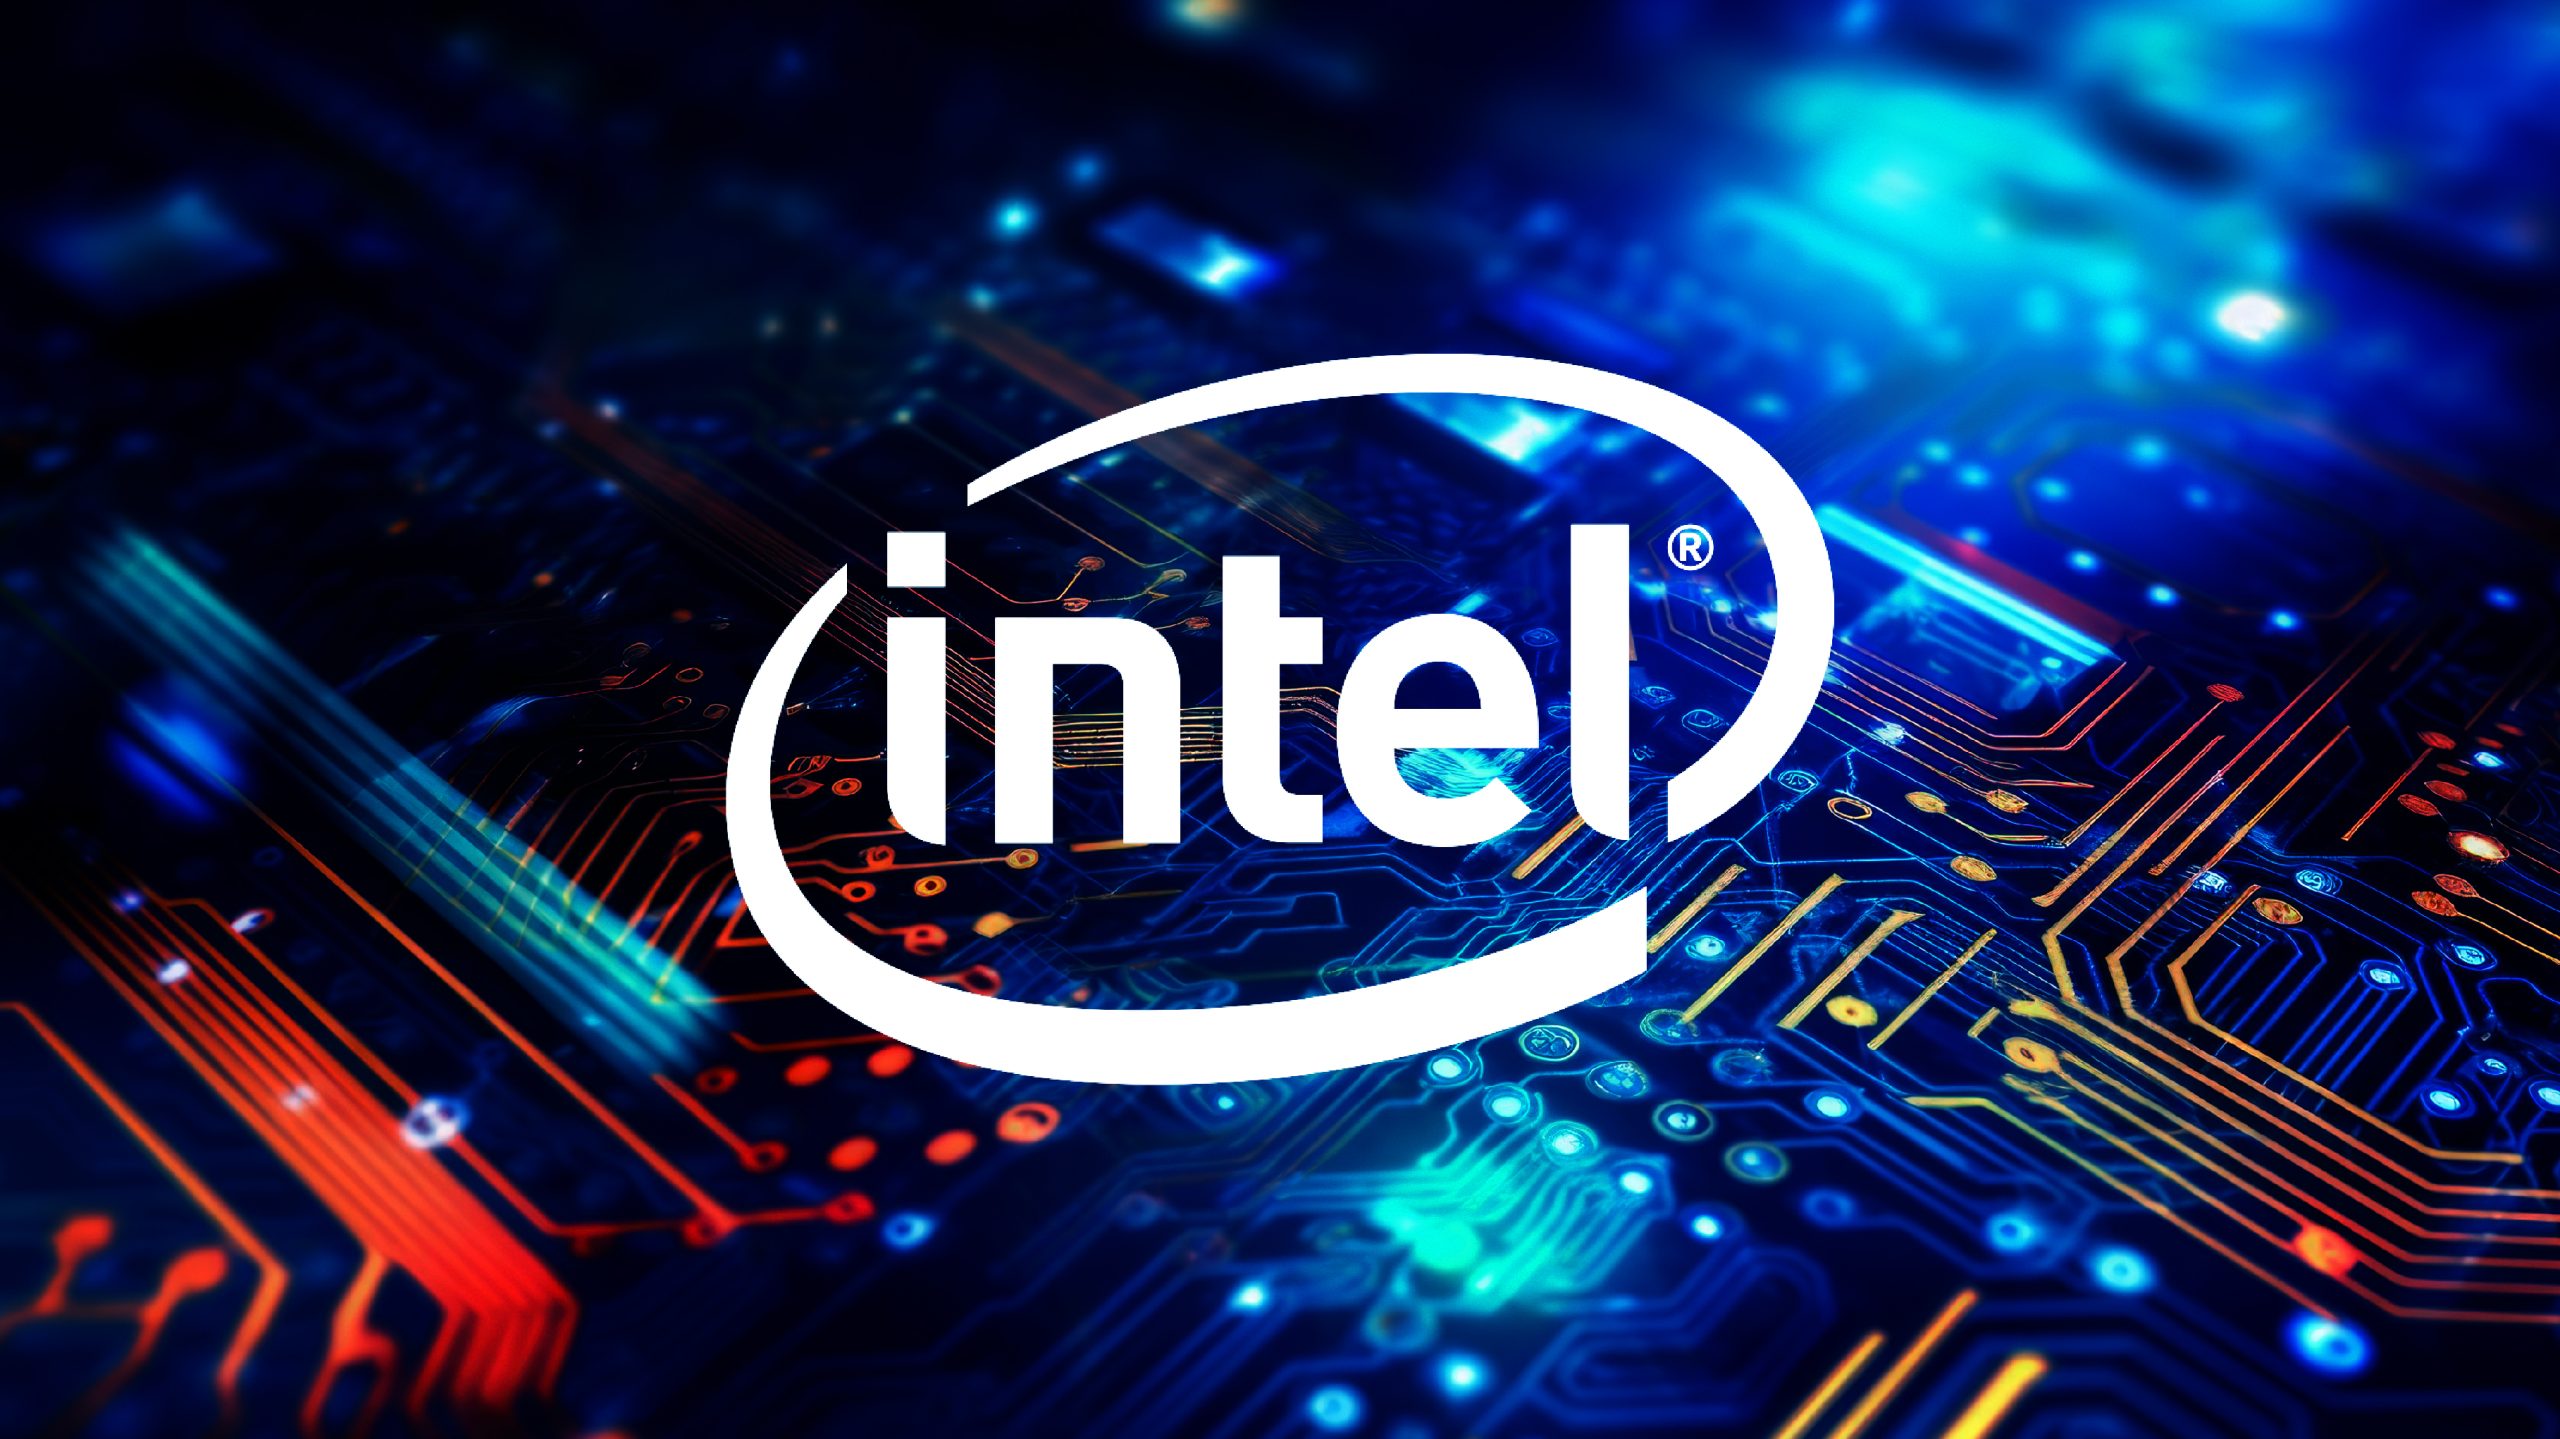 Intel has unveiled the Gaudi 3 AI chip